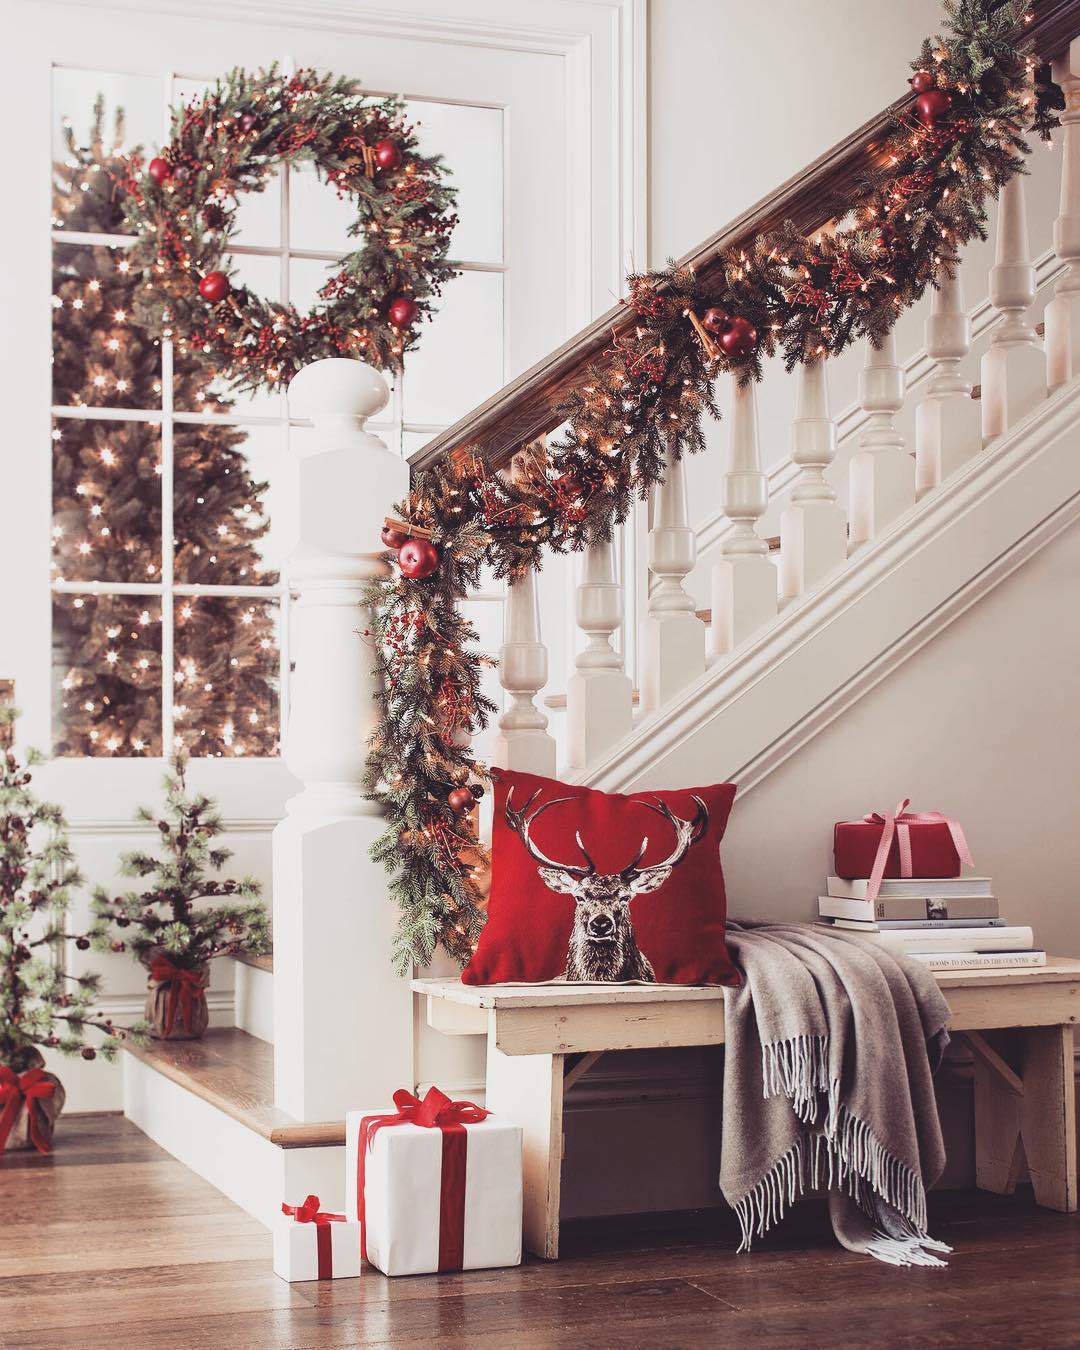 Christmas lighting ideas that are sure to illuminate your holiday spirit.